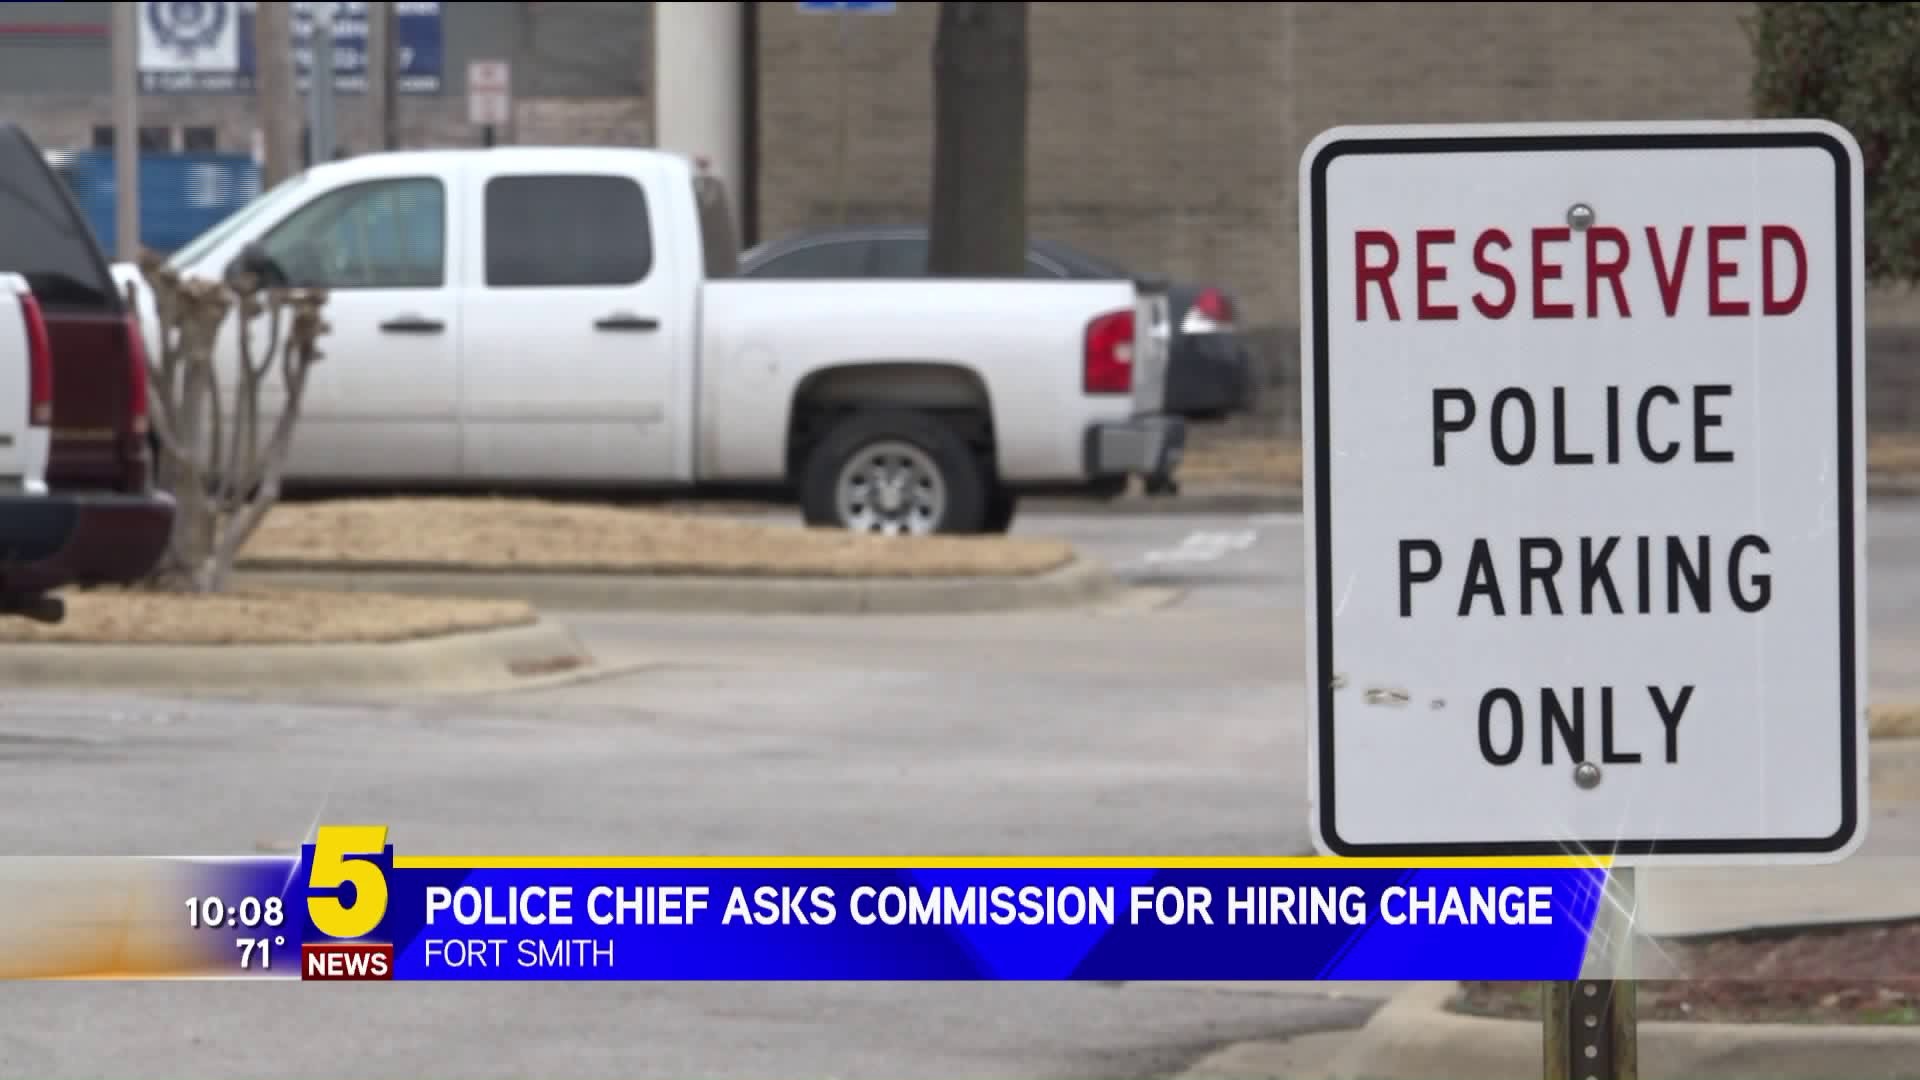 Police Chief Asks Commission For Hiring Change